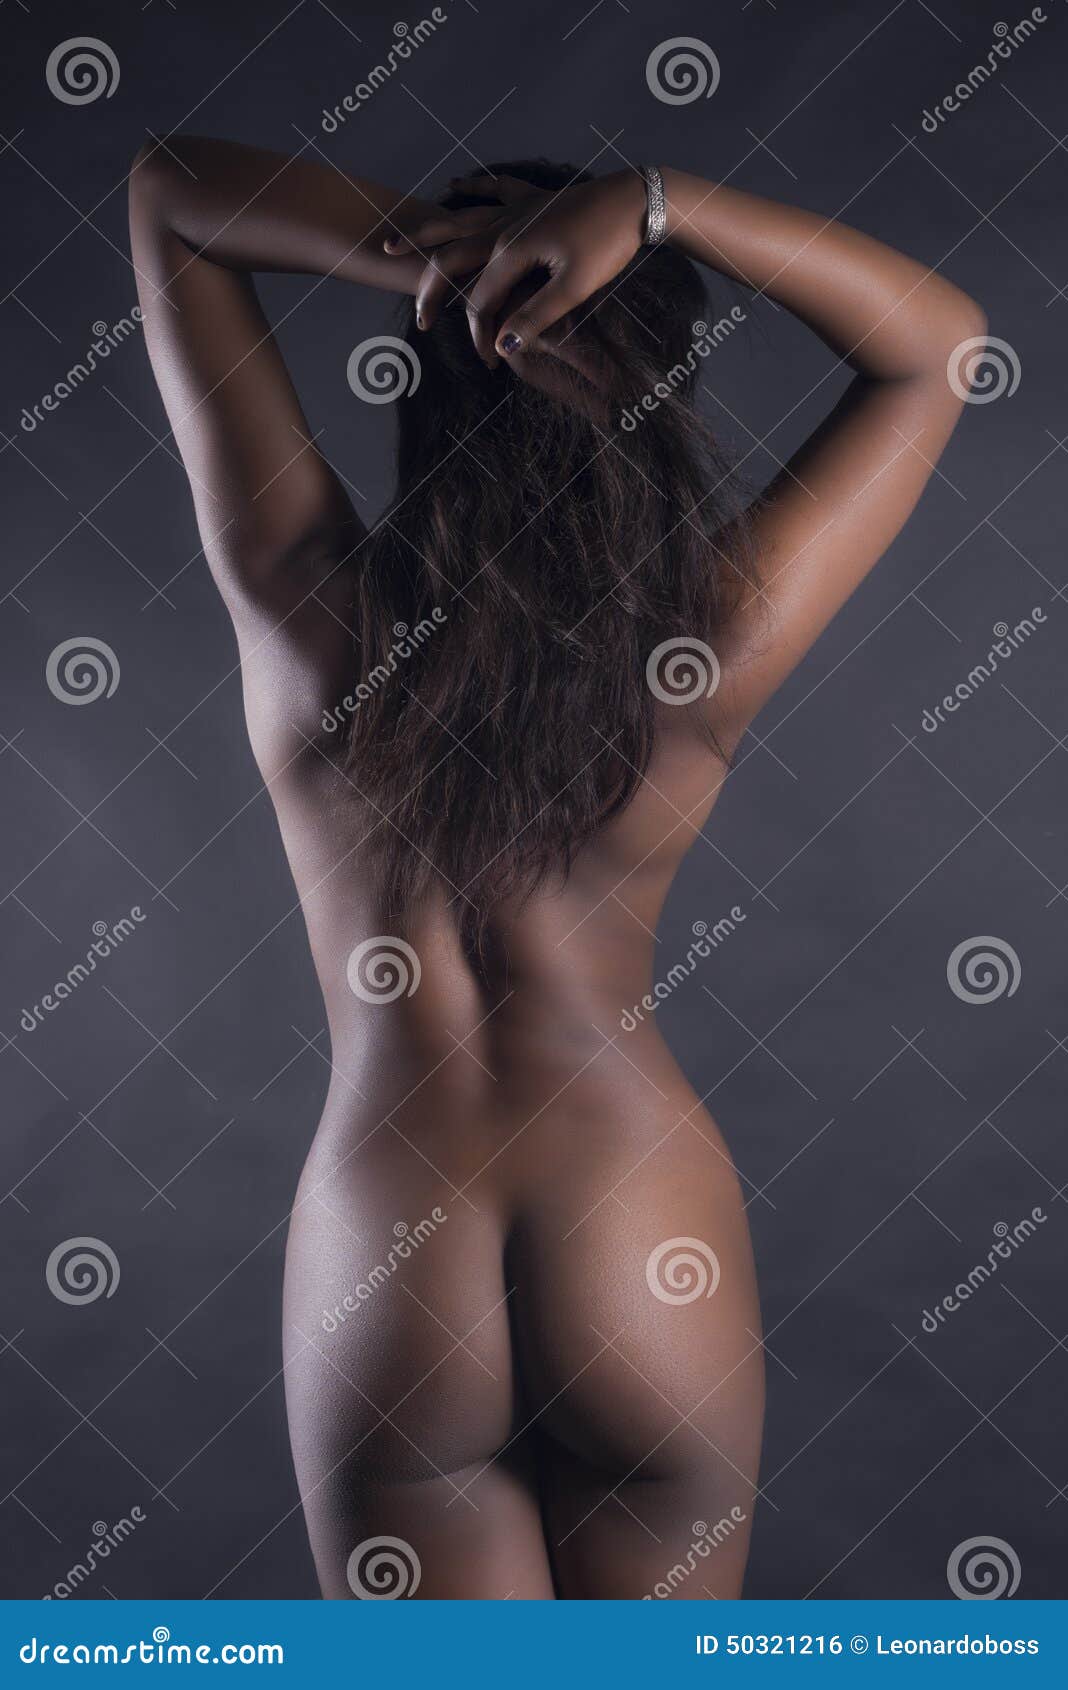 Back of black women in the nude